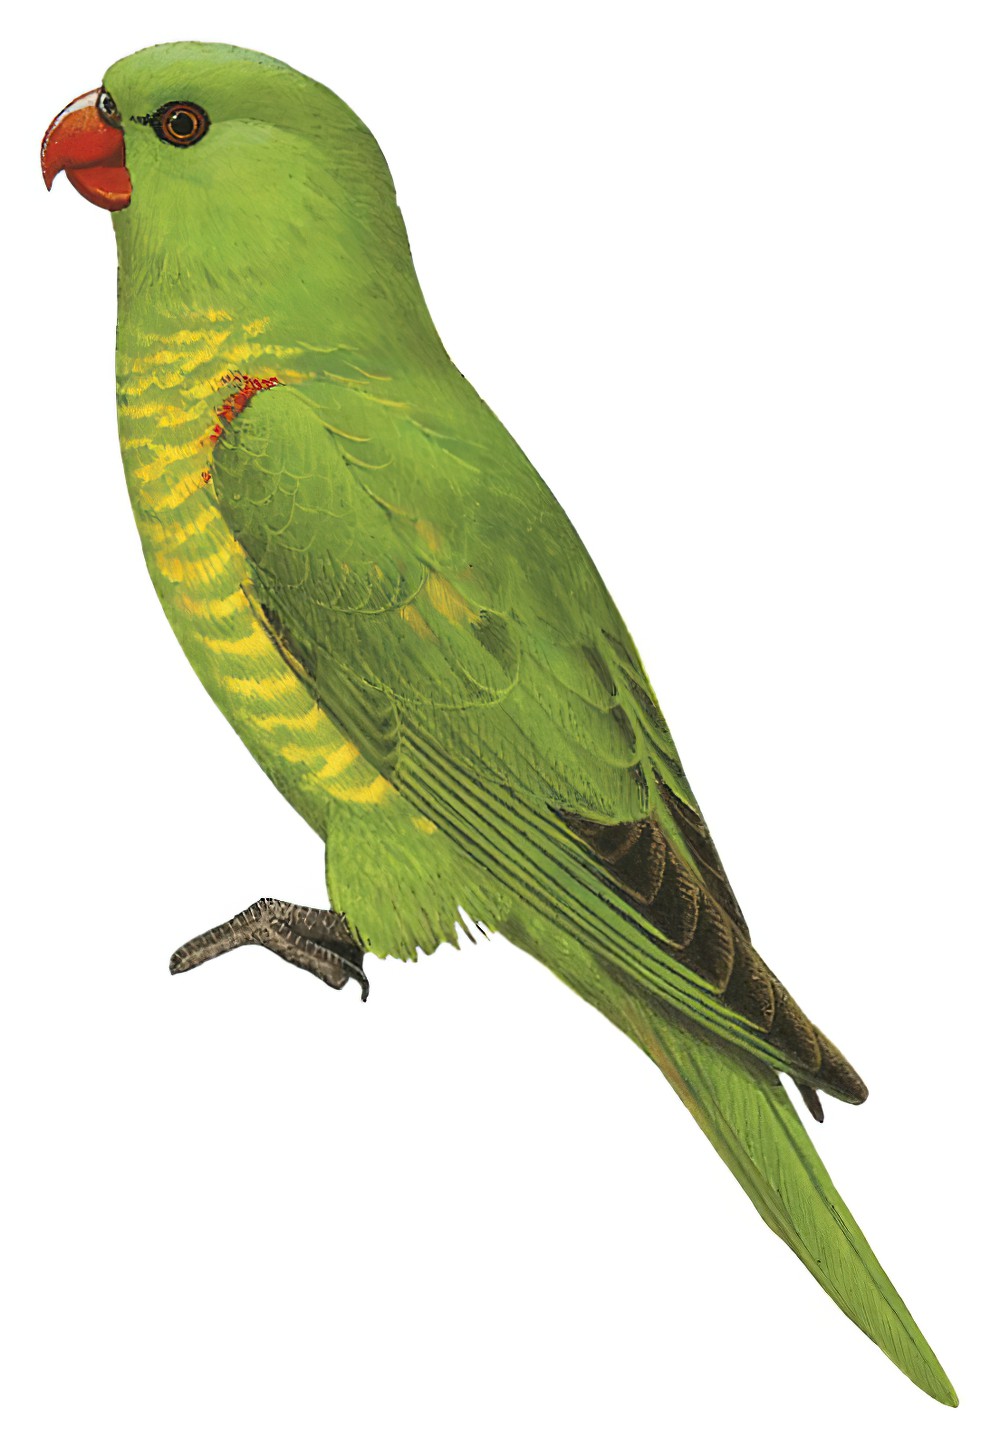 Scaly-breasted Lorikeet / Trichoglossus chlorolepidotus